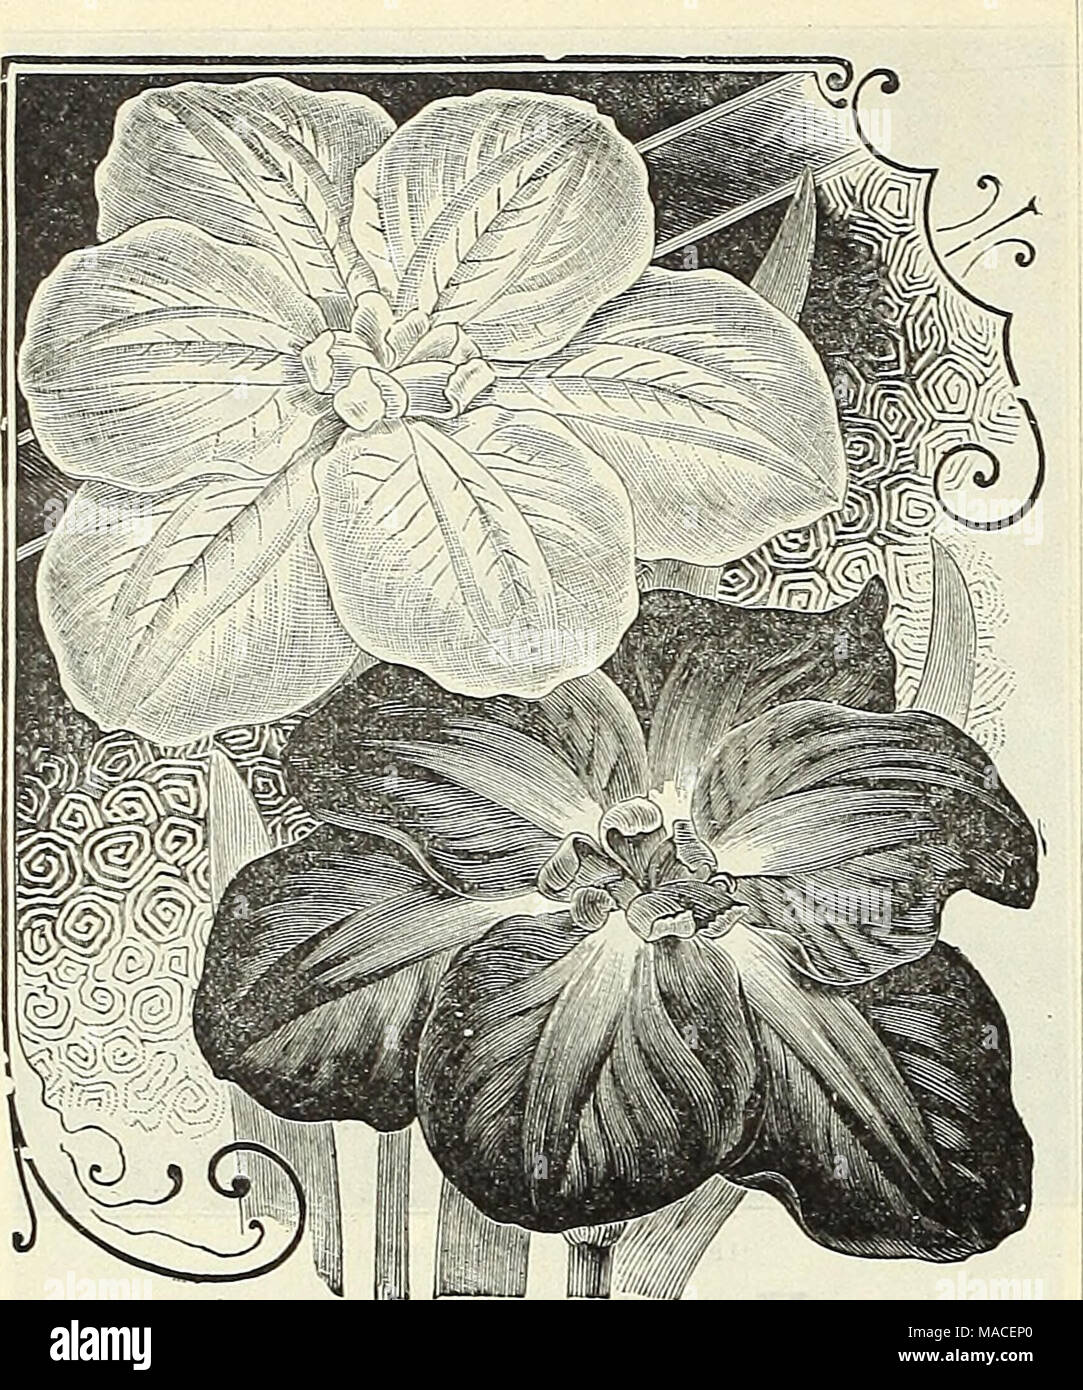 . Dreer's wholesale price list for 1903 : flower seeds, bulbs plants tools, fertilizers, insecticides, sundries, etc . ™ MI UB&amp;ikHf a IRIS KyEMPFERI ( JAPANESE IRIS) Iris Hybrida Pumila. An entirely new race of Iris, which has been obtained by cross- ing the early dwarf flowering varieties of Pumila with the best large &quot;flowered forms of Iris Germanica. Their period of bloom- ing is a trifle later than the Pumila section, with flowers almost as large and fully as showy and attractive in color as the Ger- man Iris. They are, no doubt, the forerunners of what is likely to prove an impor Stock Photo